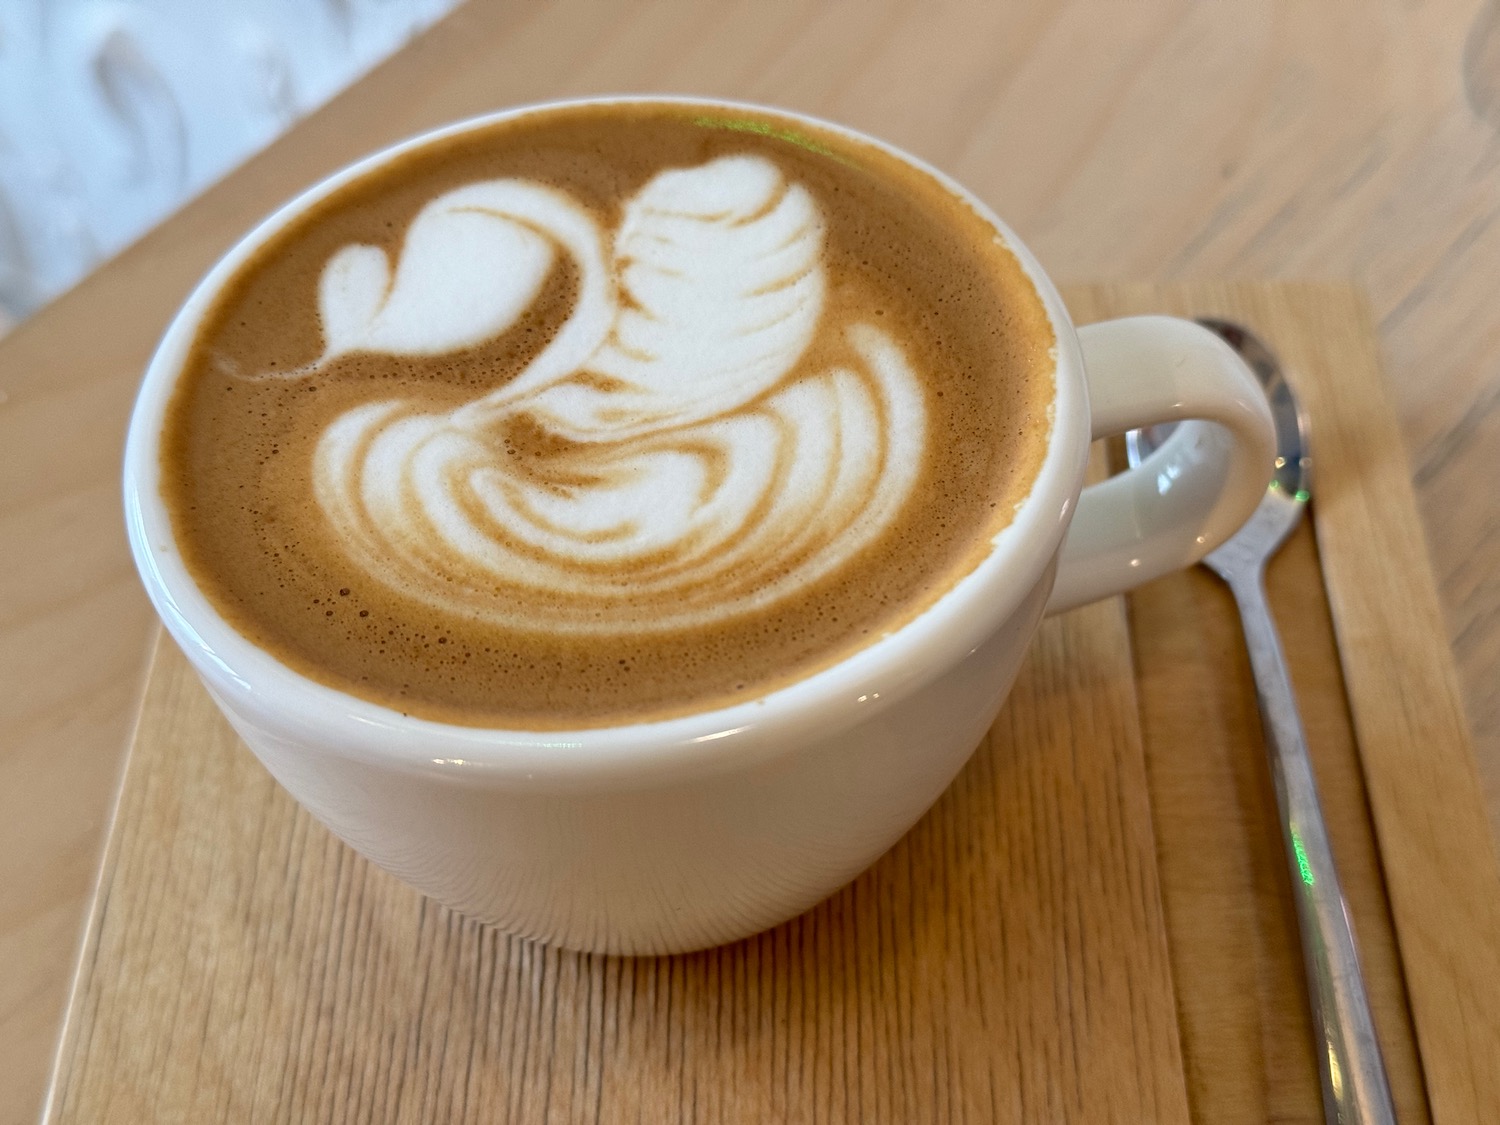 a cup of coffee with a swan design in the foam